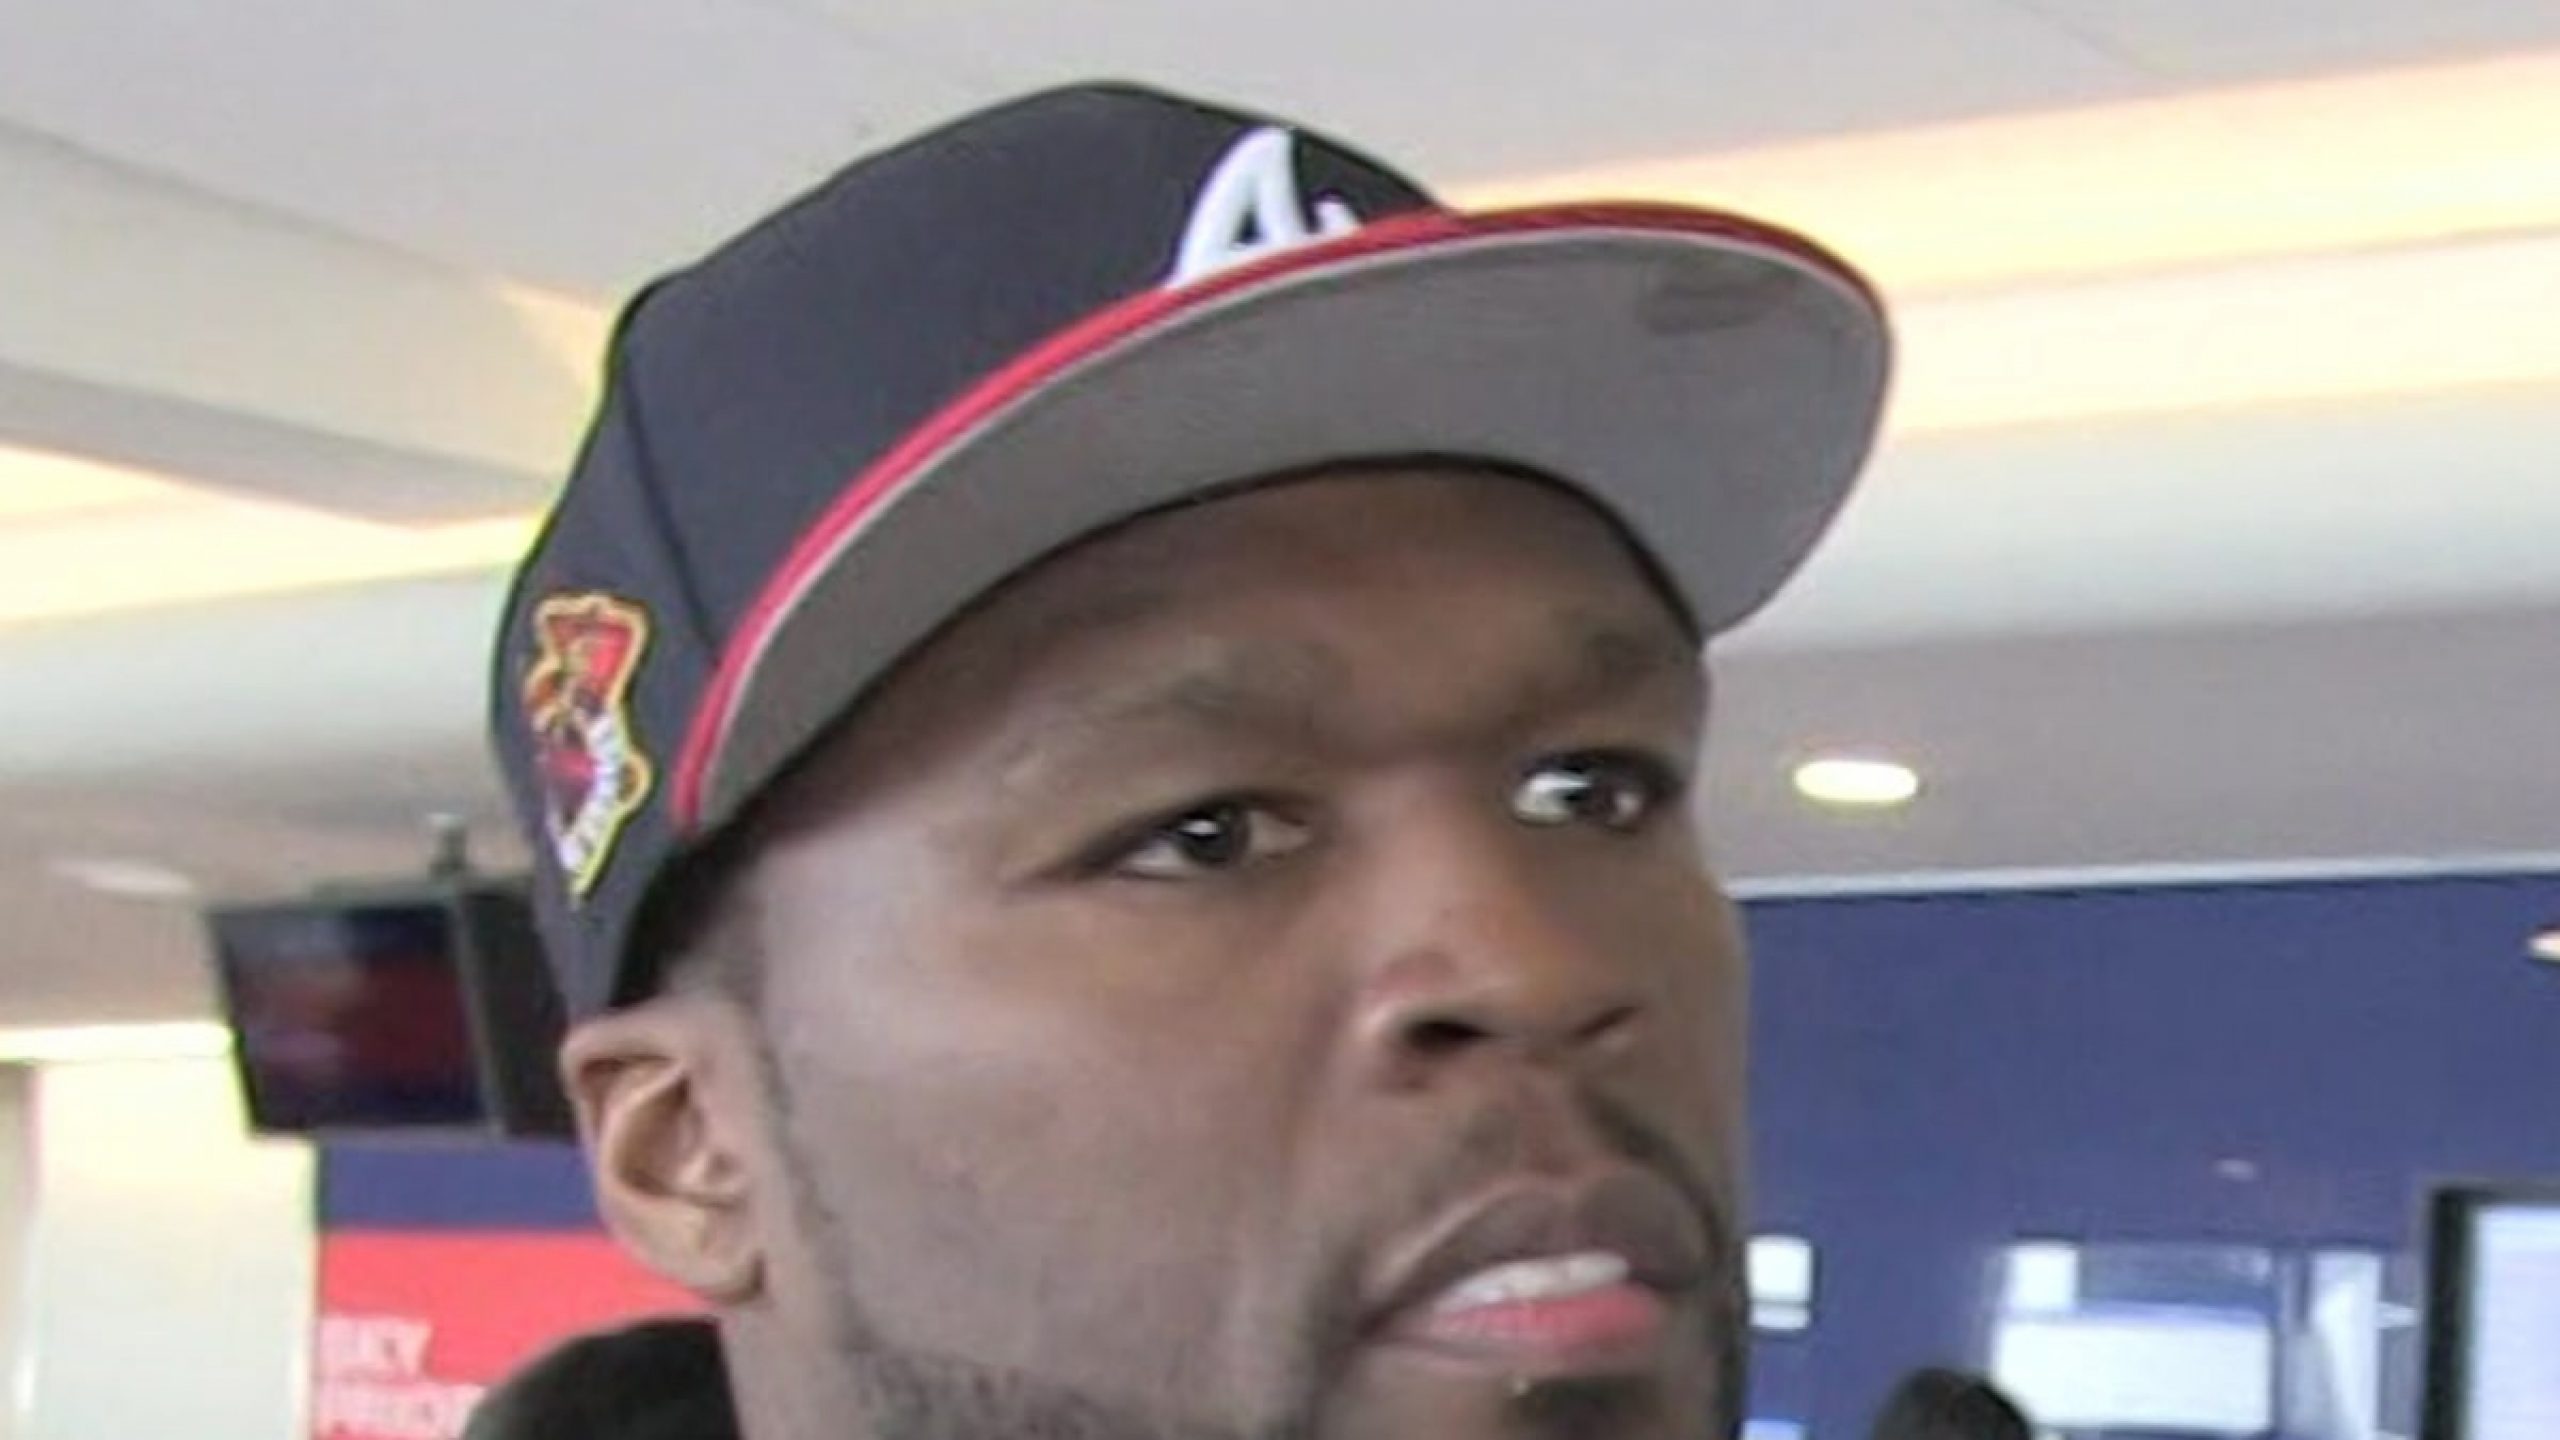 50 Cent Burglary Suspects Arrested, Allegedly Stole $3 Million